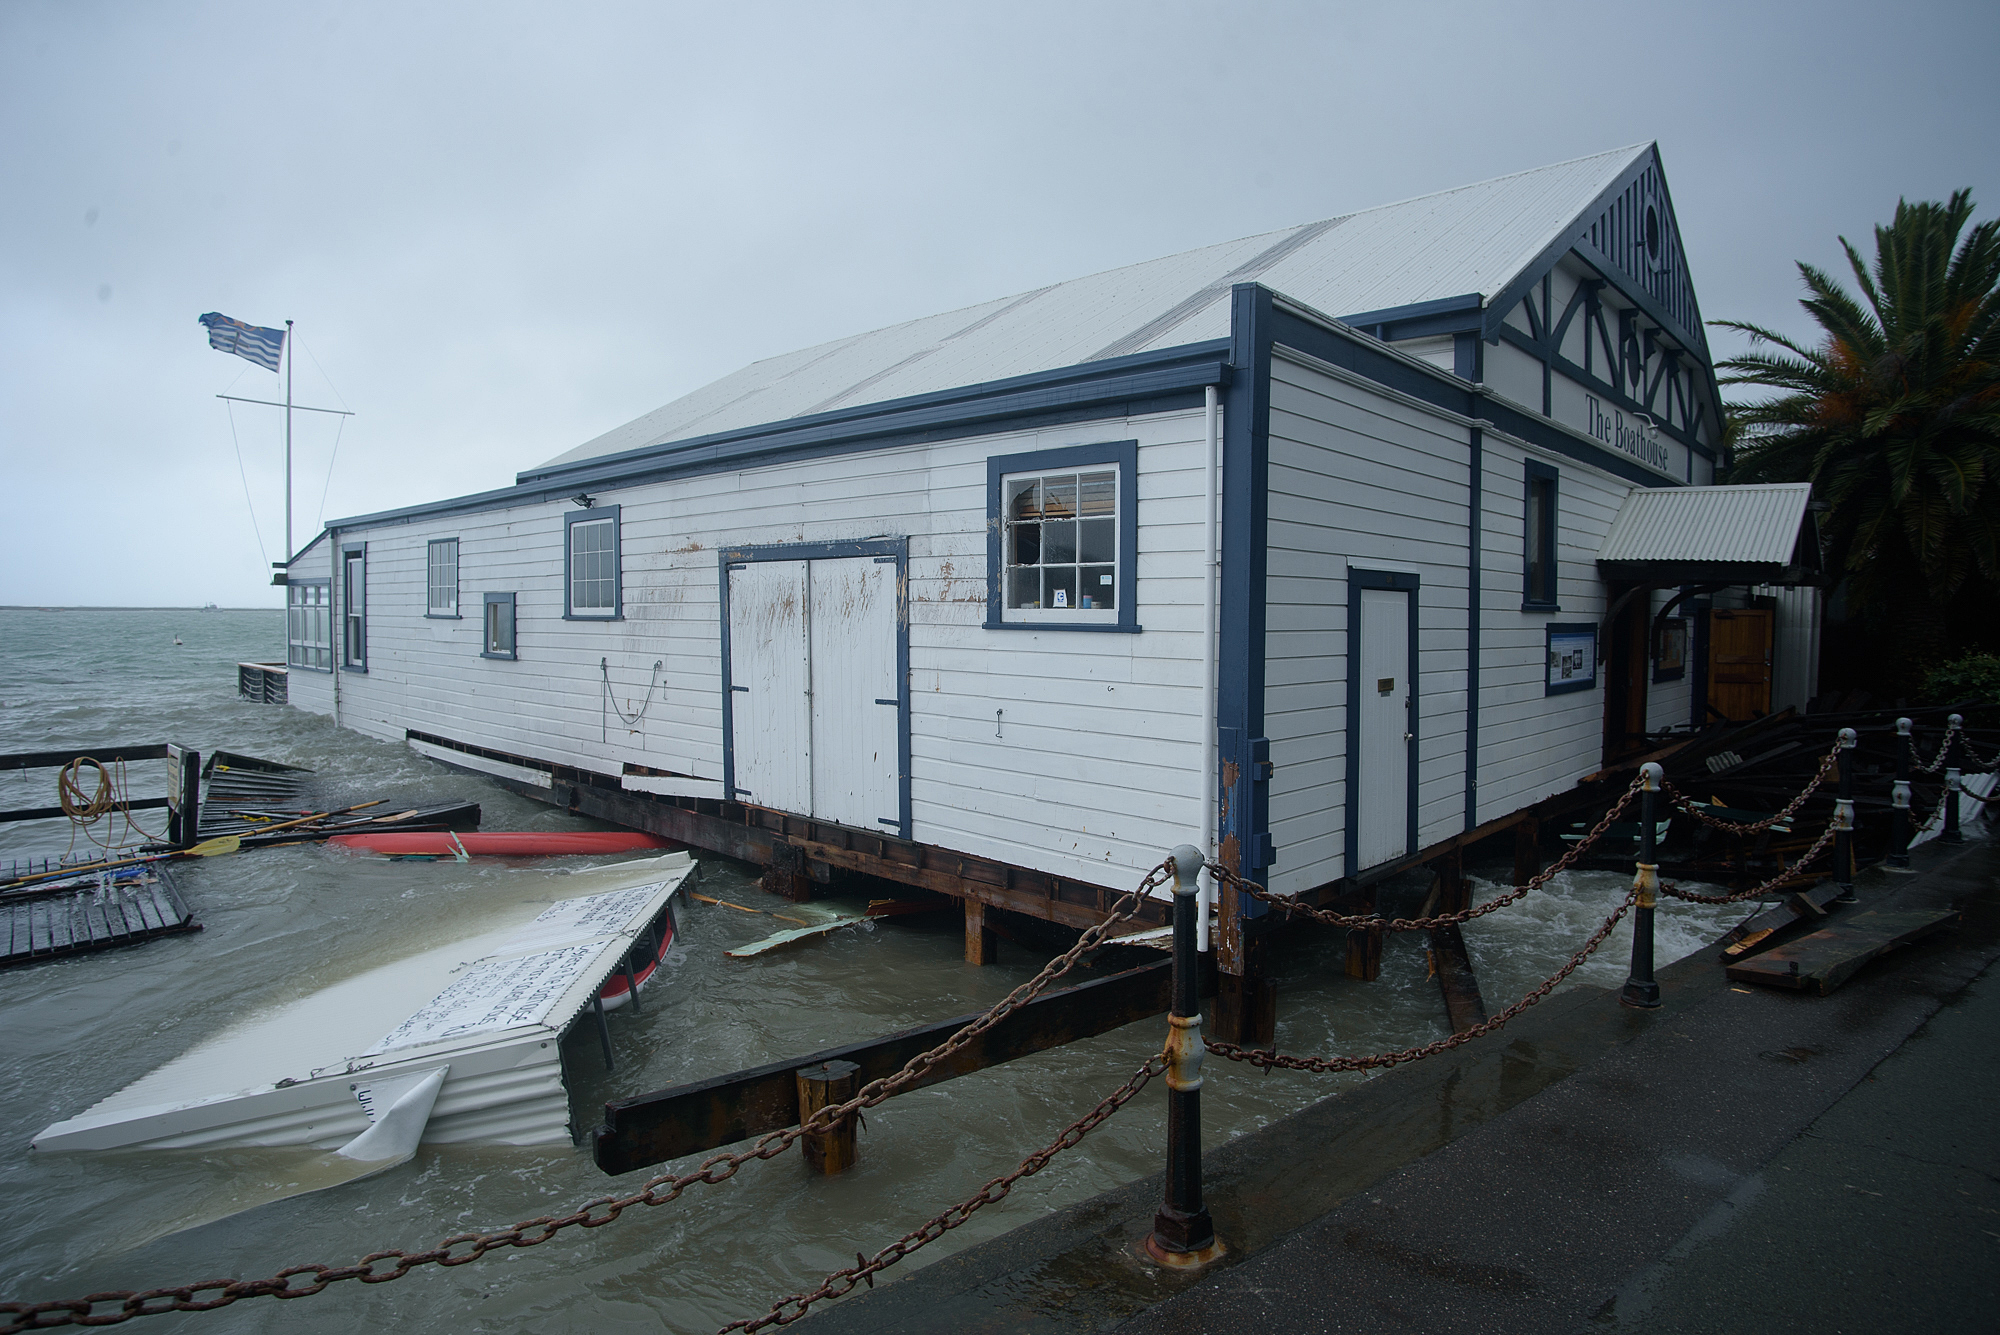 The Wairoa avoided the worst of the damage that thrashed the Boathouse in nearby Nelson. Photo: Digby Shaw.